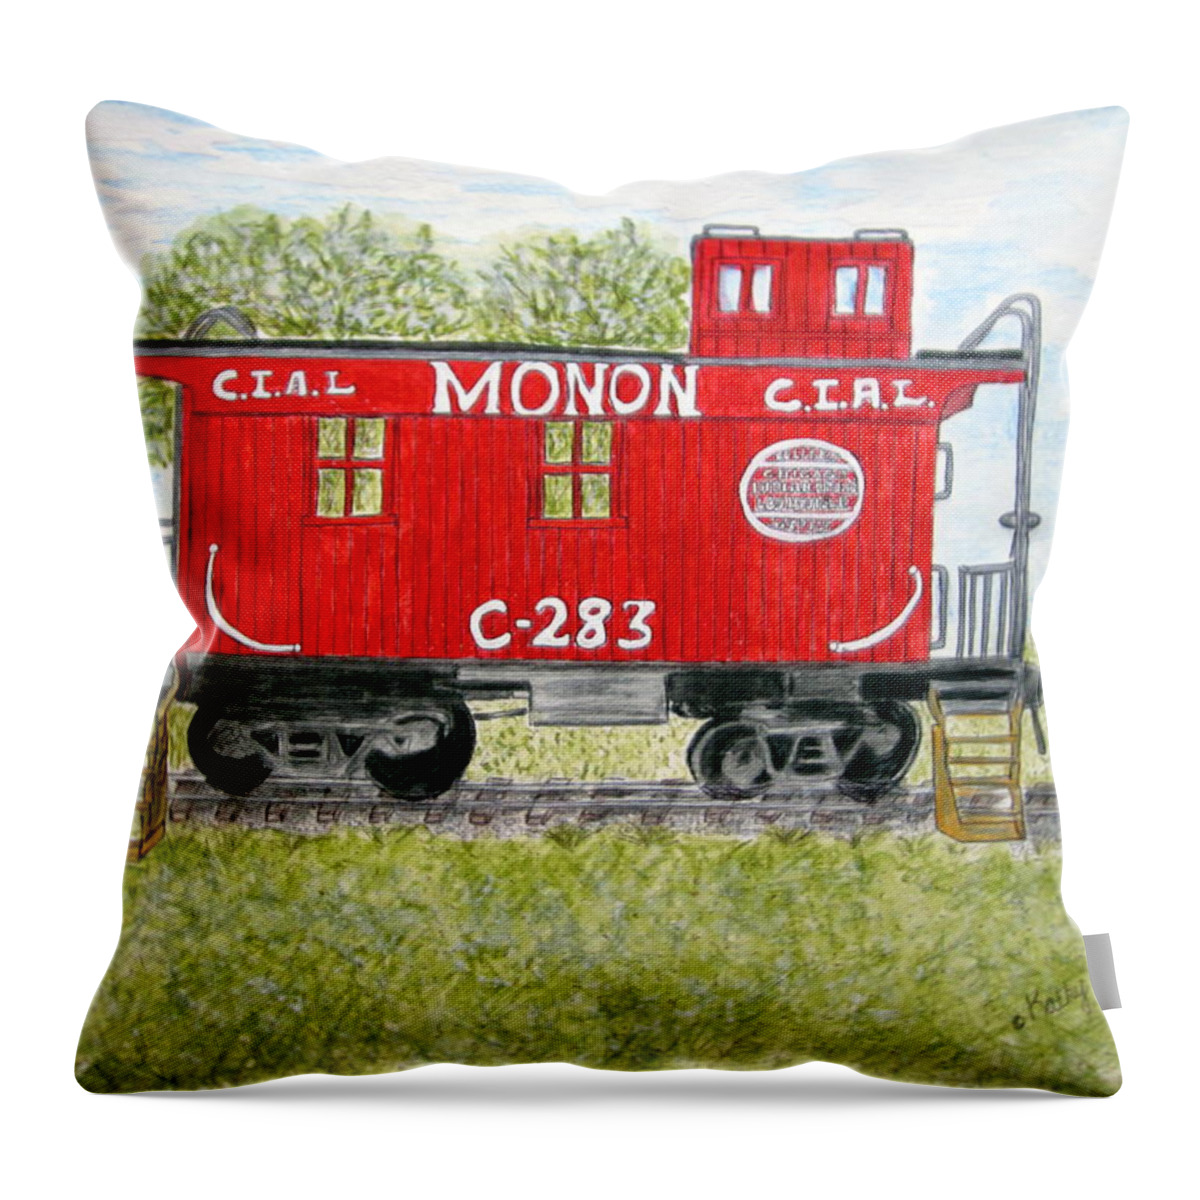 Monon Throw Pillow featuring the painting Monon Wood Caboose Train C 283 1950s by Kathy Marrs Chandler